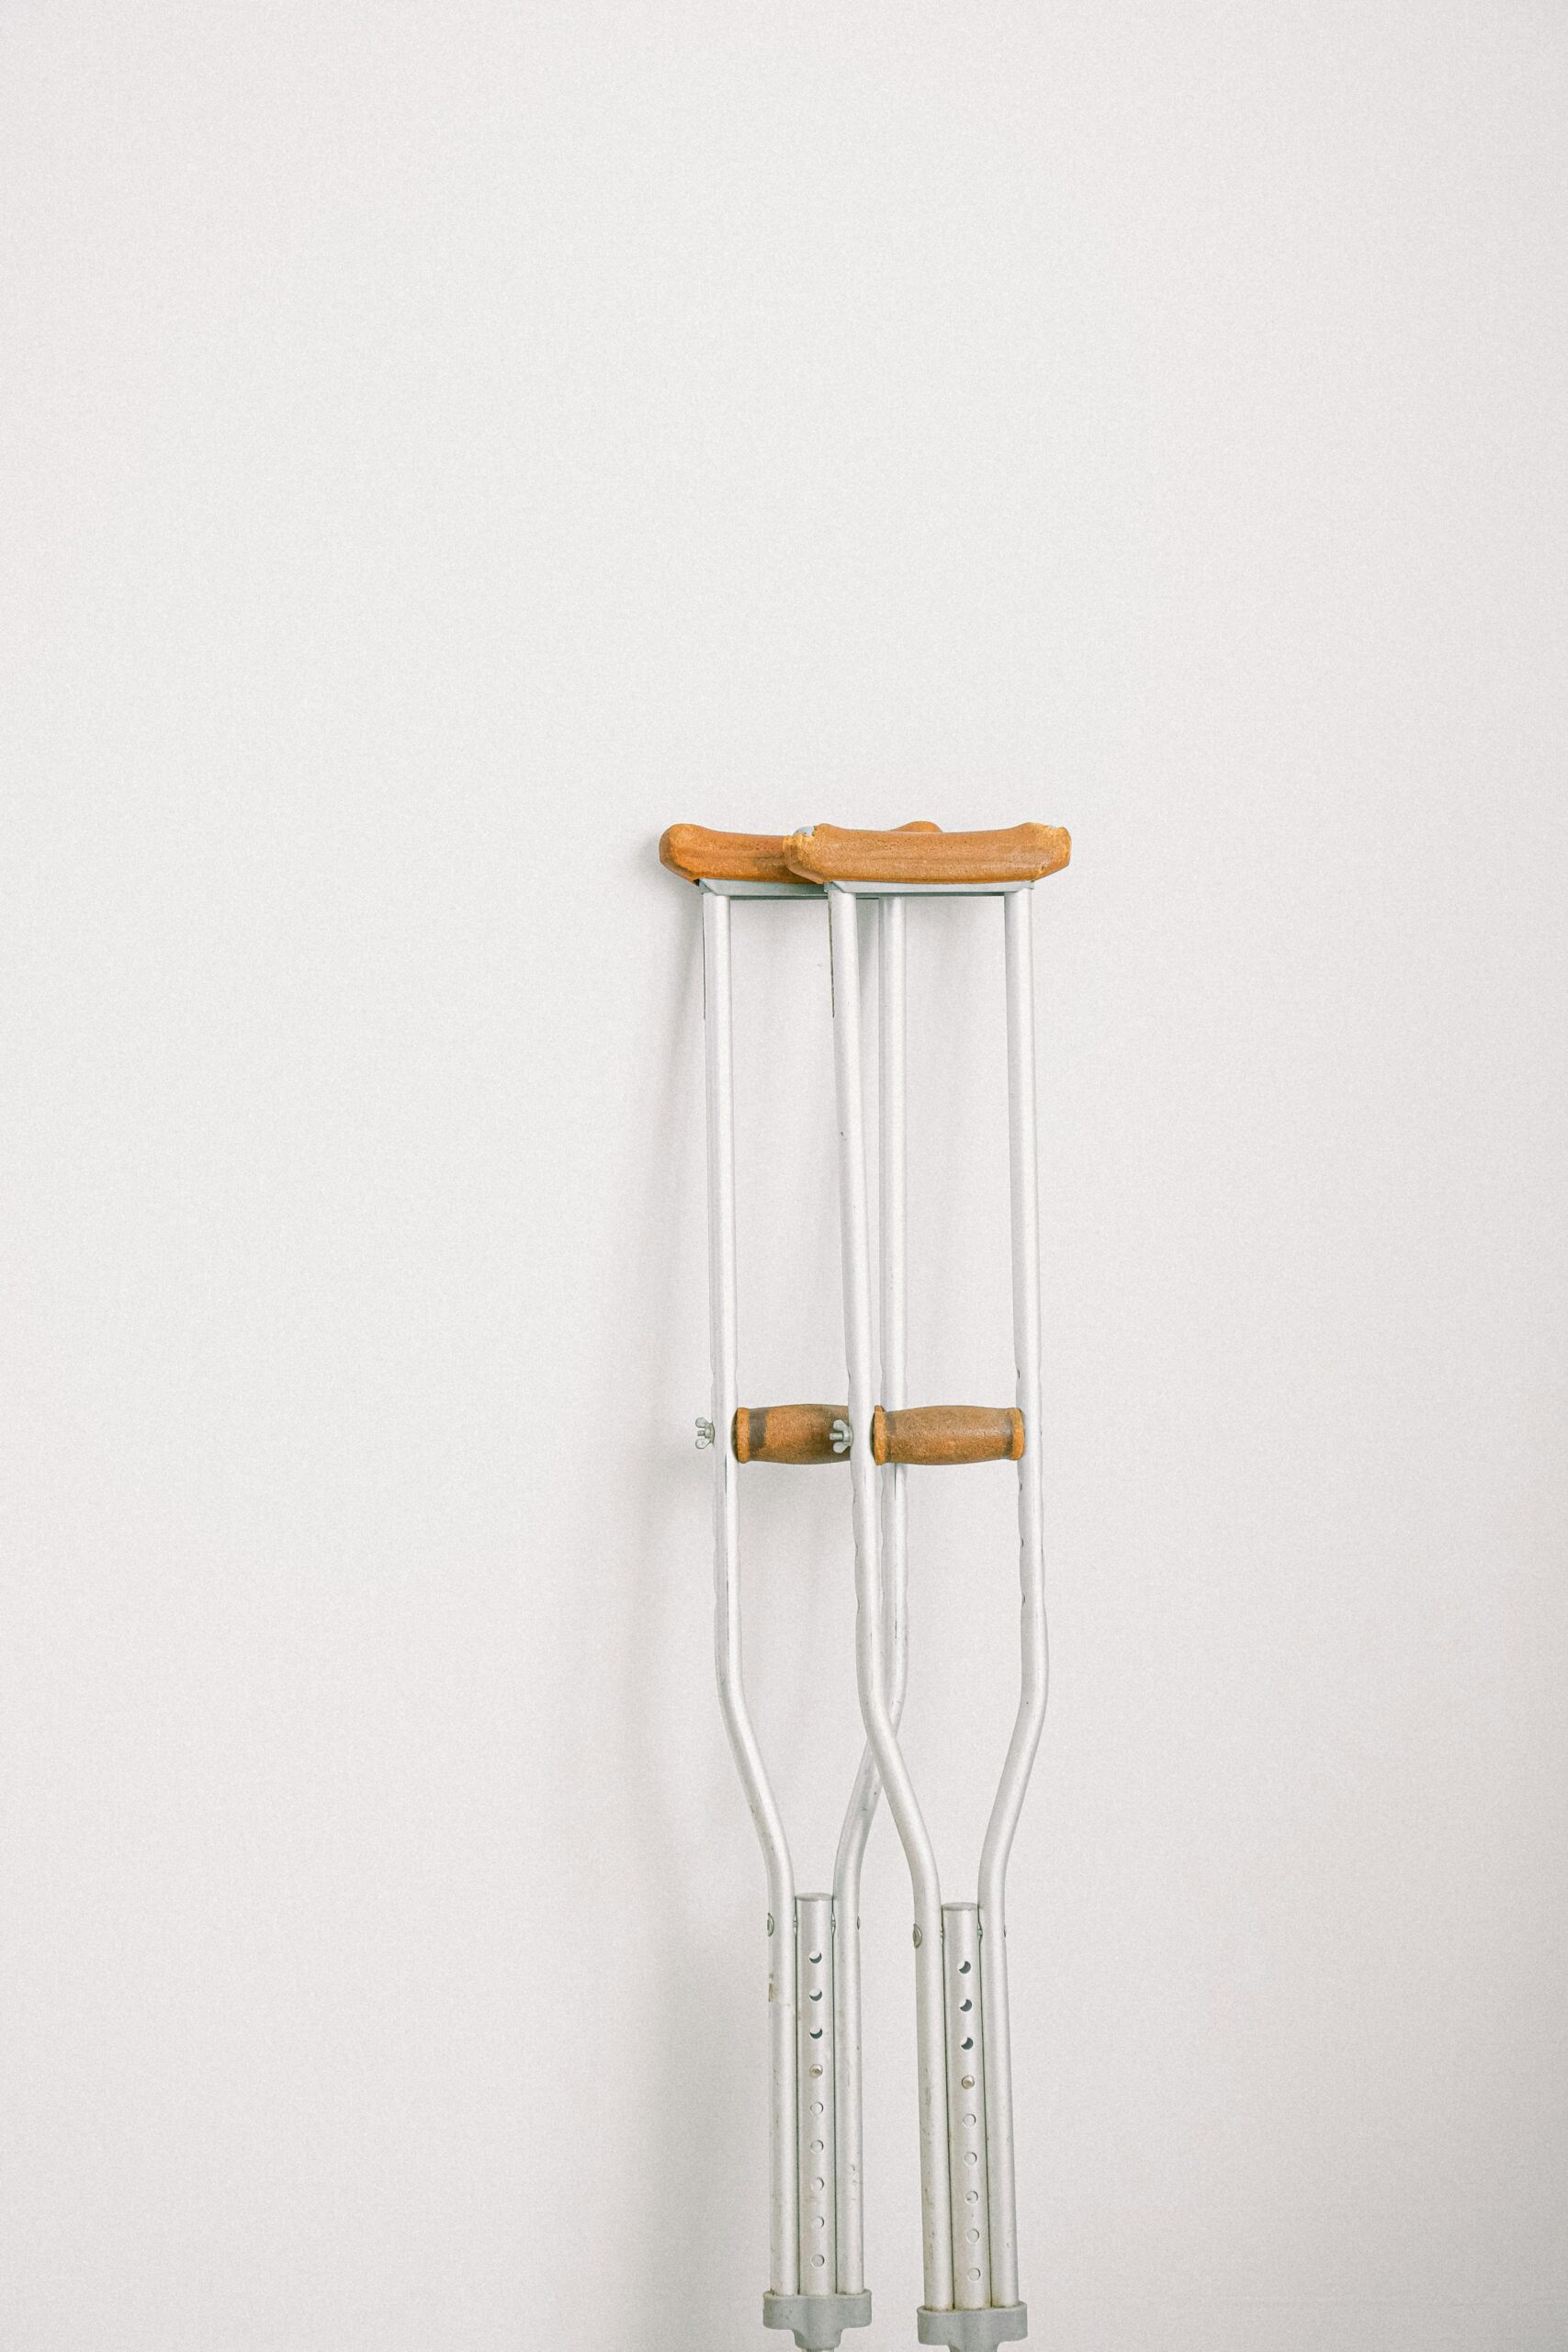 Image of crutches.